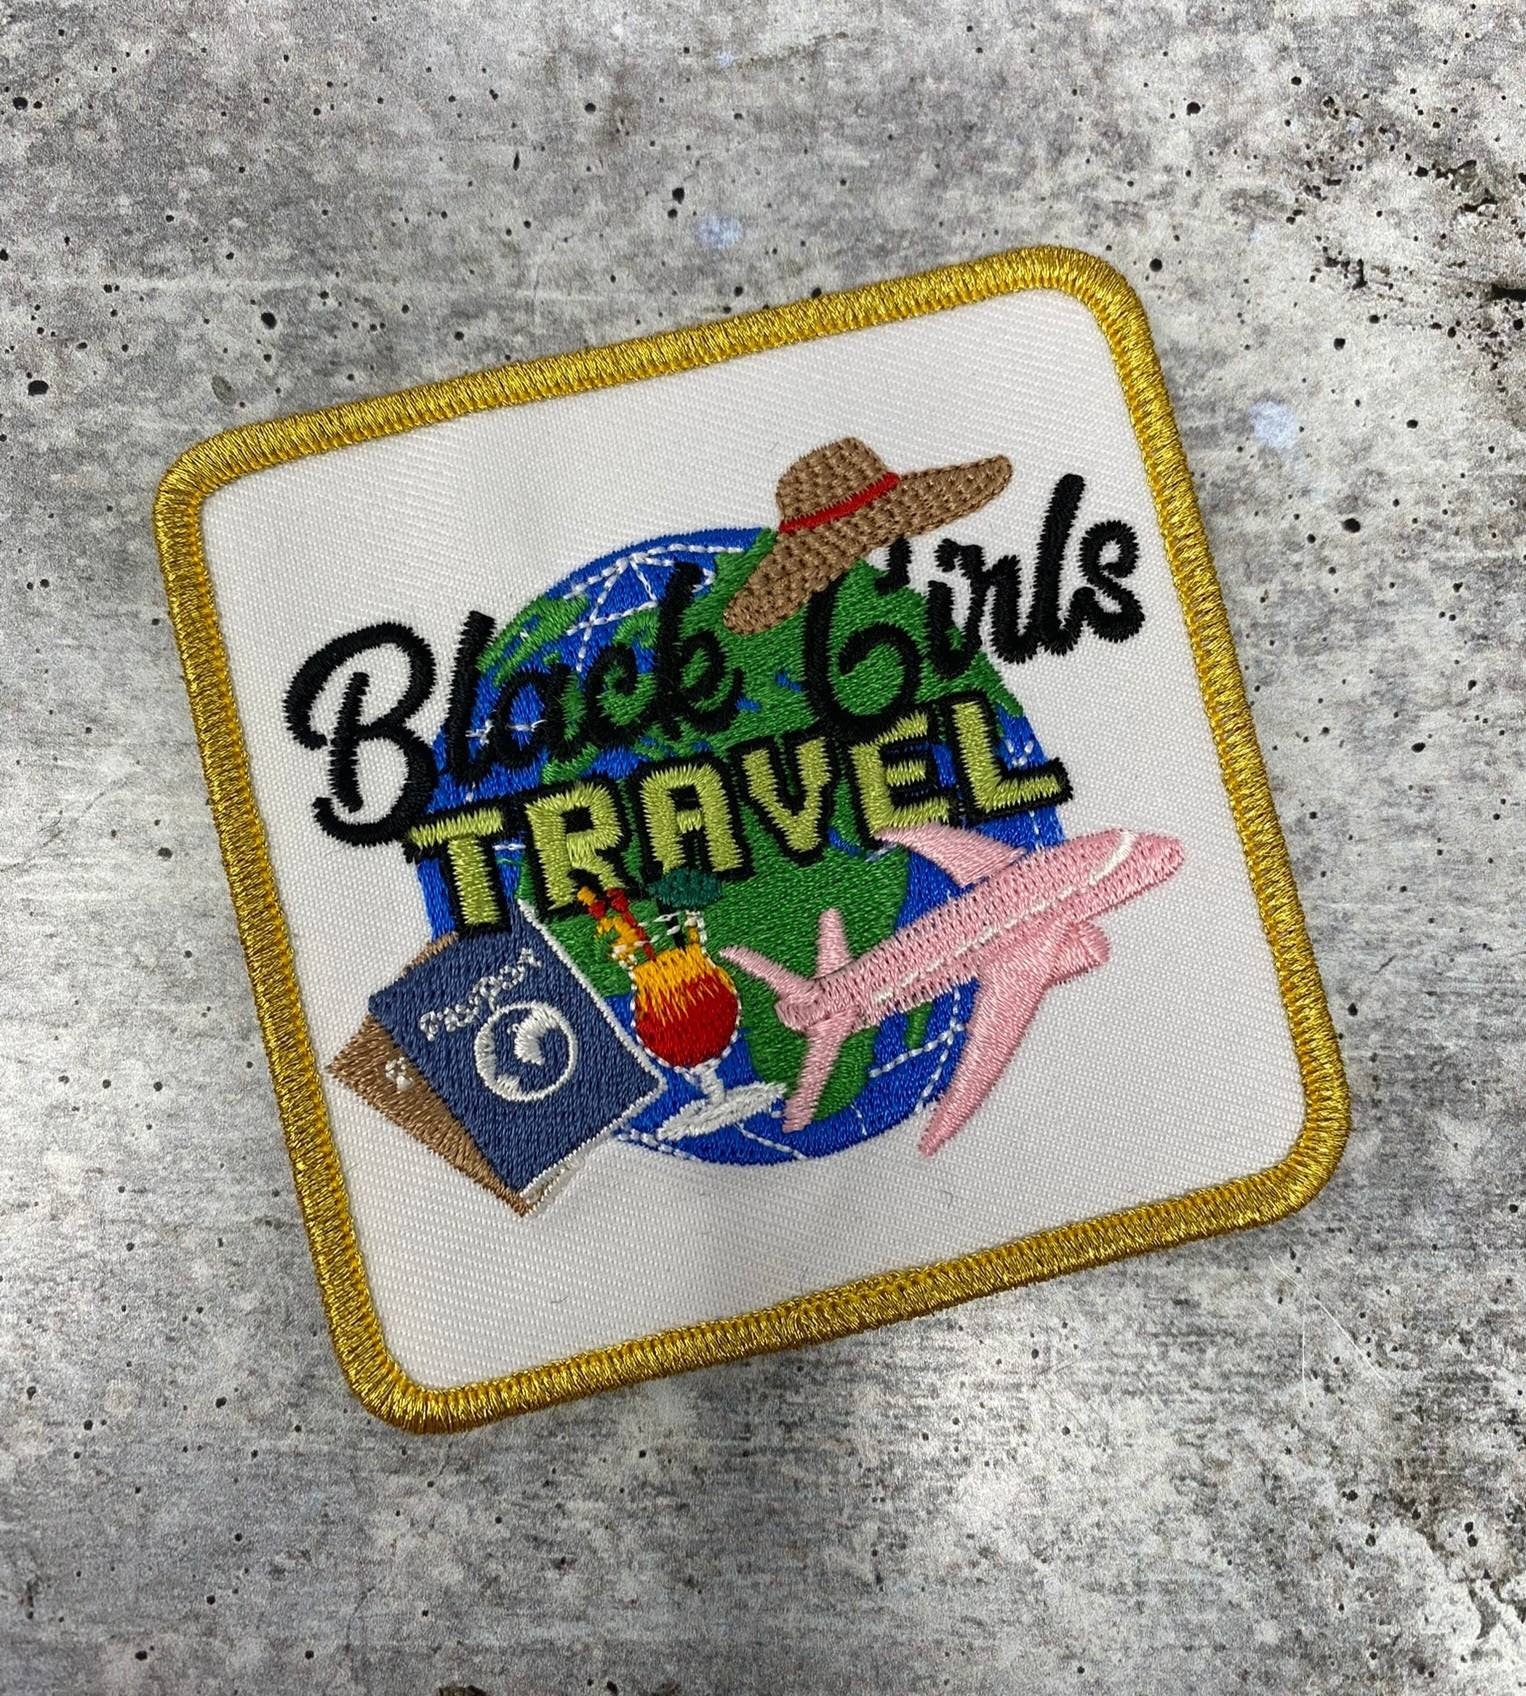 Wanderlust black Girls Travel Iron-on Patch, Size 3x3 With Metallic Gold,  Embroidered Patch for Jackets, Hats, & Crocs, Small Patch 